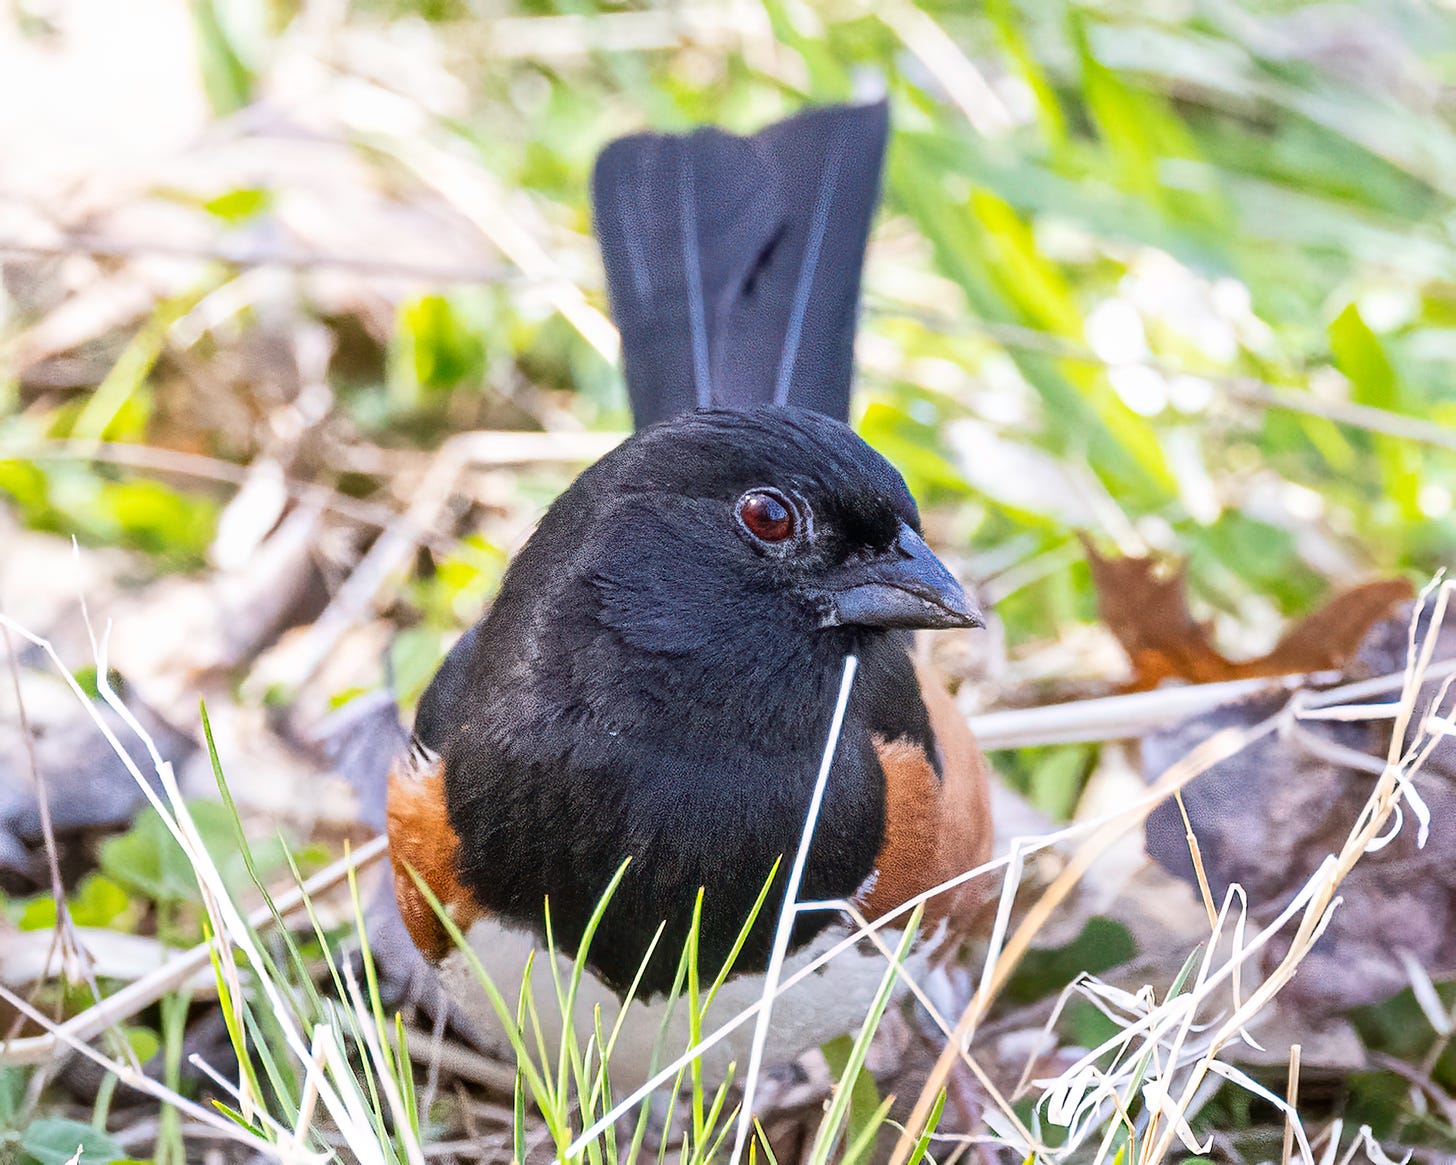 The eastern towhee stands on the ground among the leaf litter. He is looking to the side. His head is black and he has rusty patches on his sides.